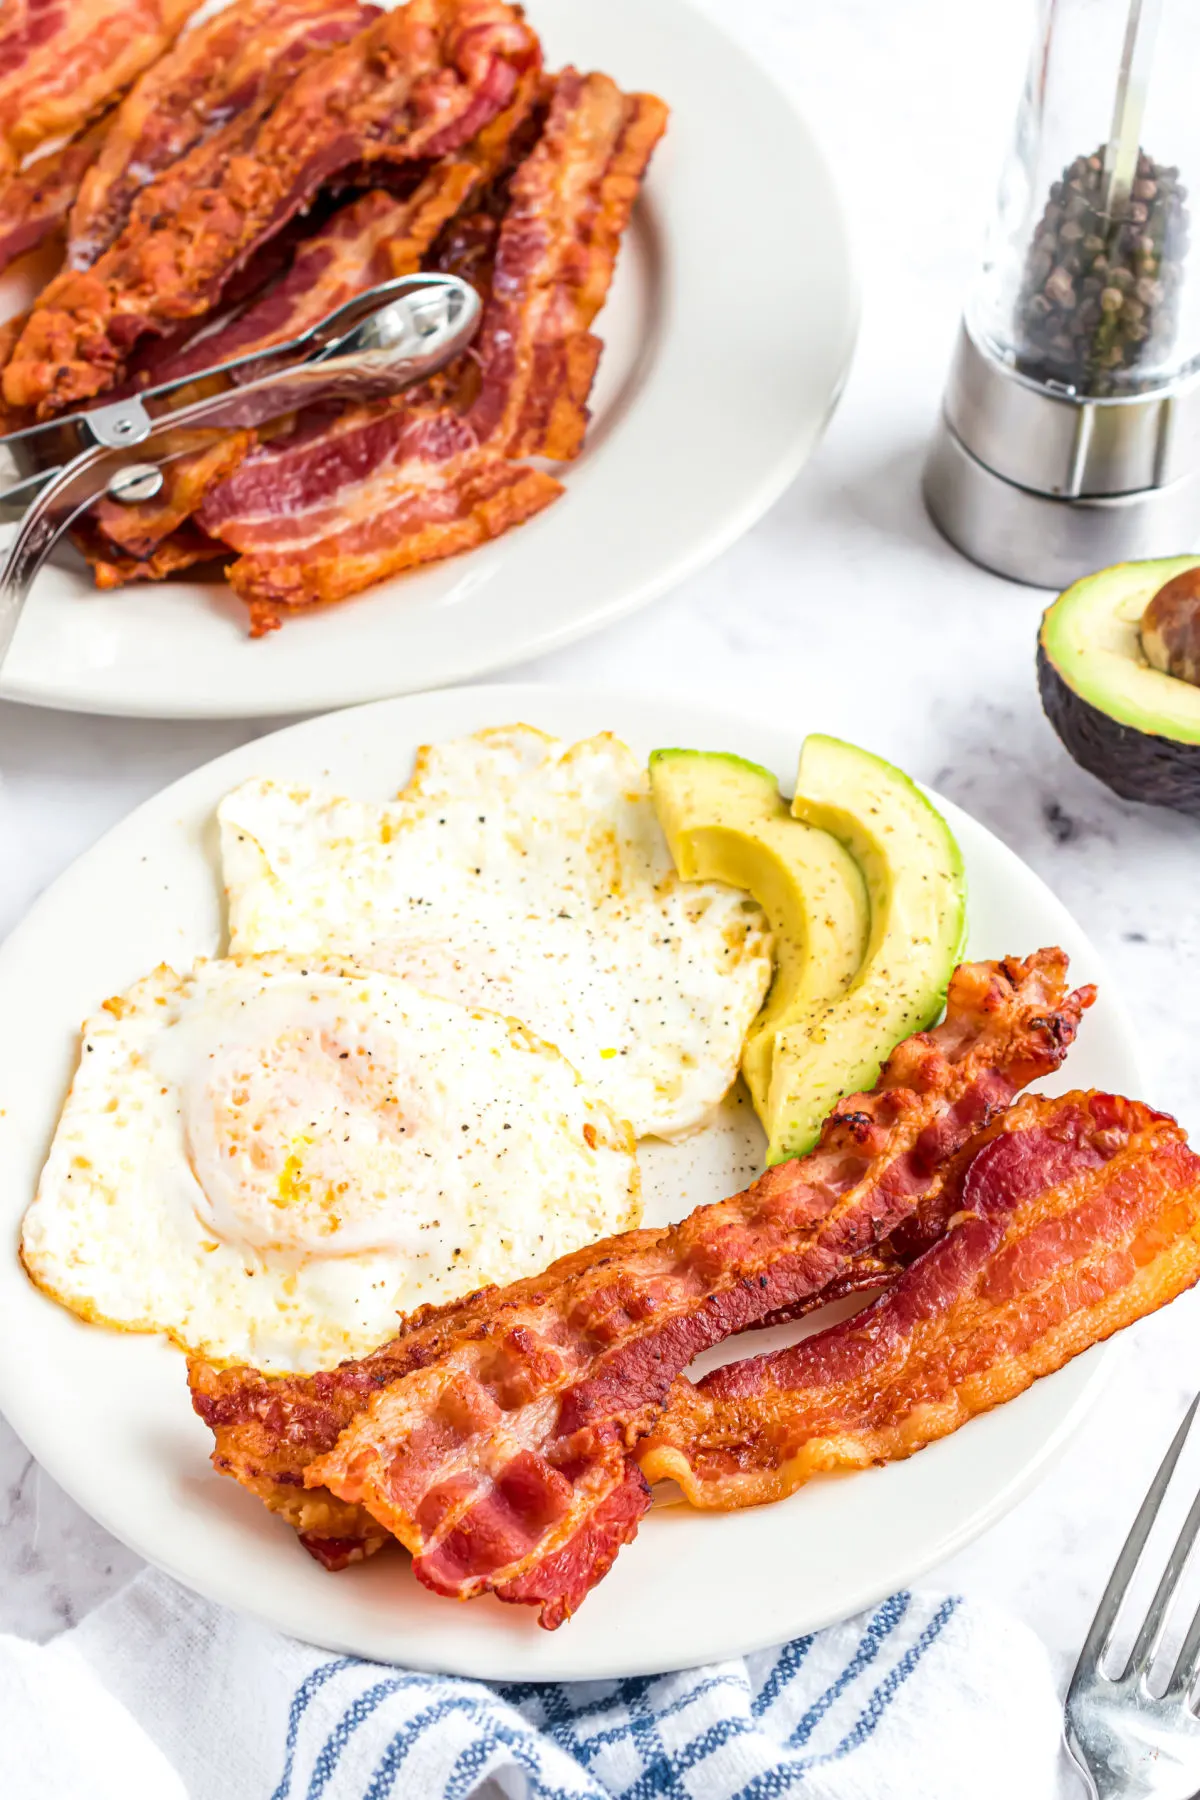 Oven Cooked Bacon: Easy, Hands-Free, Whole30, Keto - Whole Kitchen